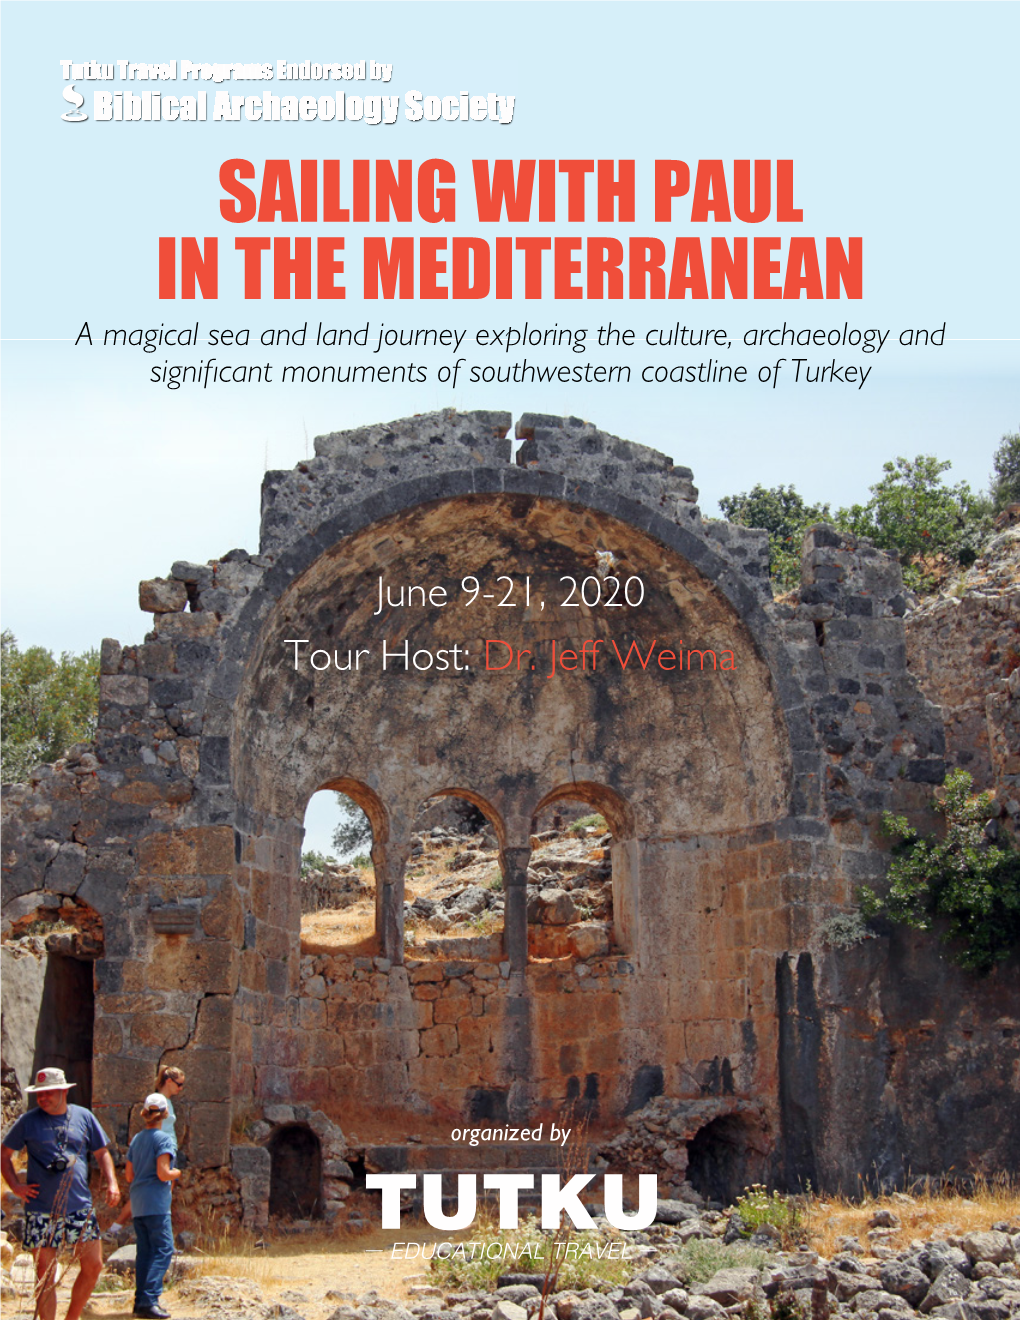 SAILING with PAUL in the MEDITERRANEAN a Magical Sea and Land Journey Exploring the Culture, Archaeology and Significant Monuments of Southwestern Coastline of Turkey